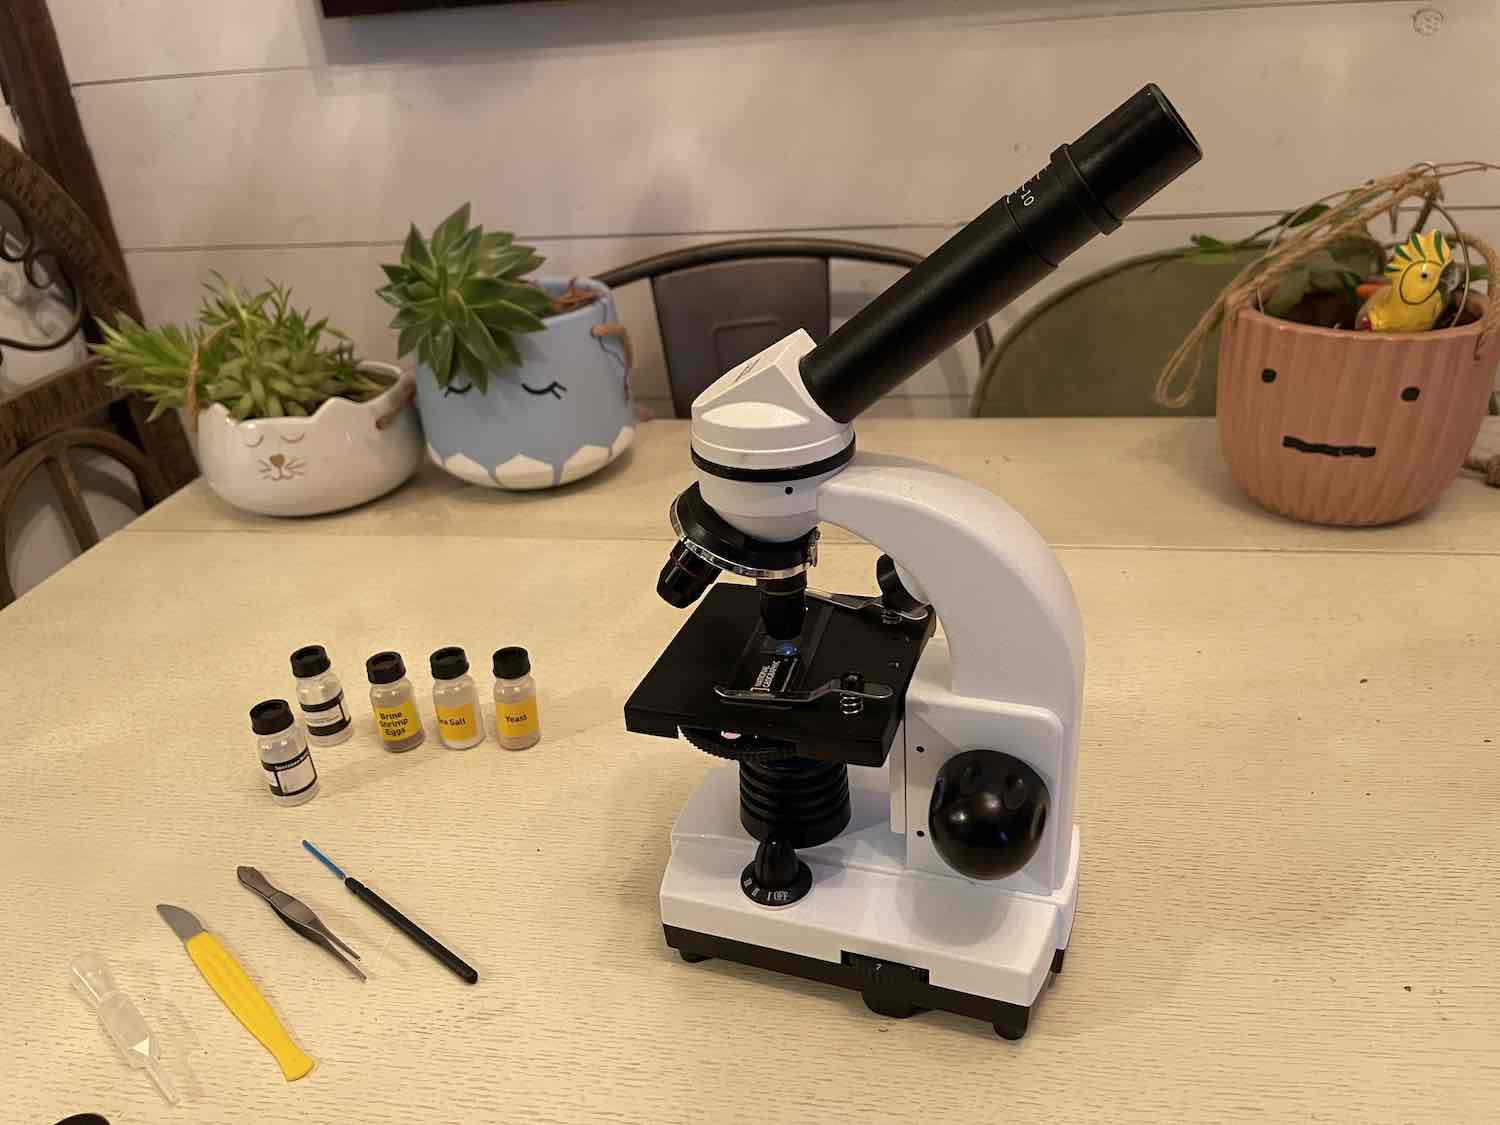 National Geographic microscope